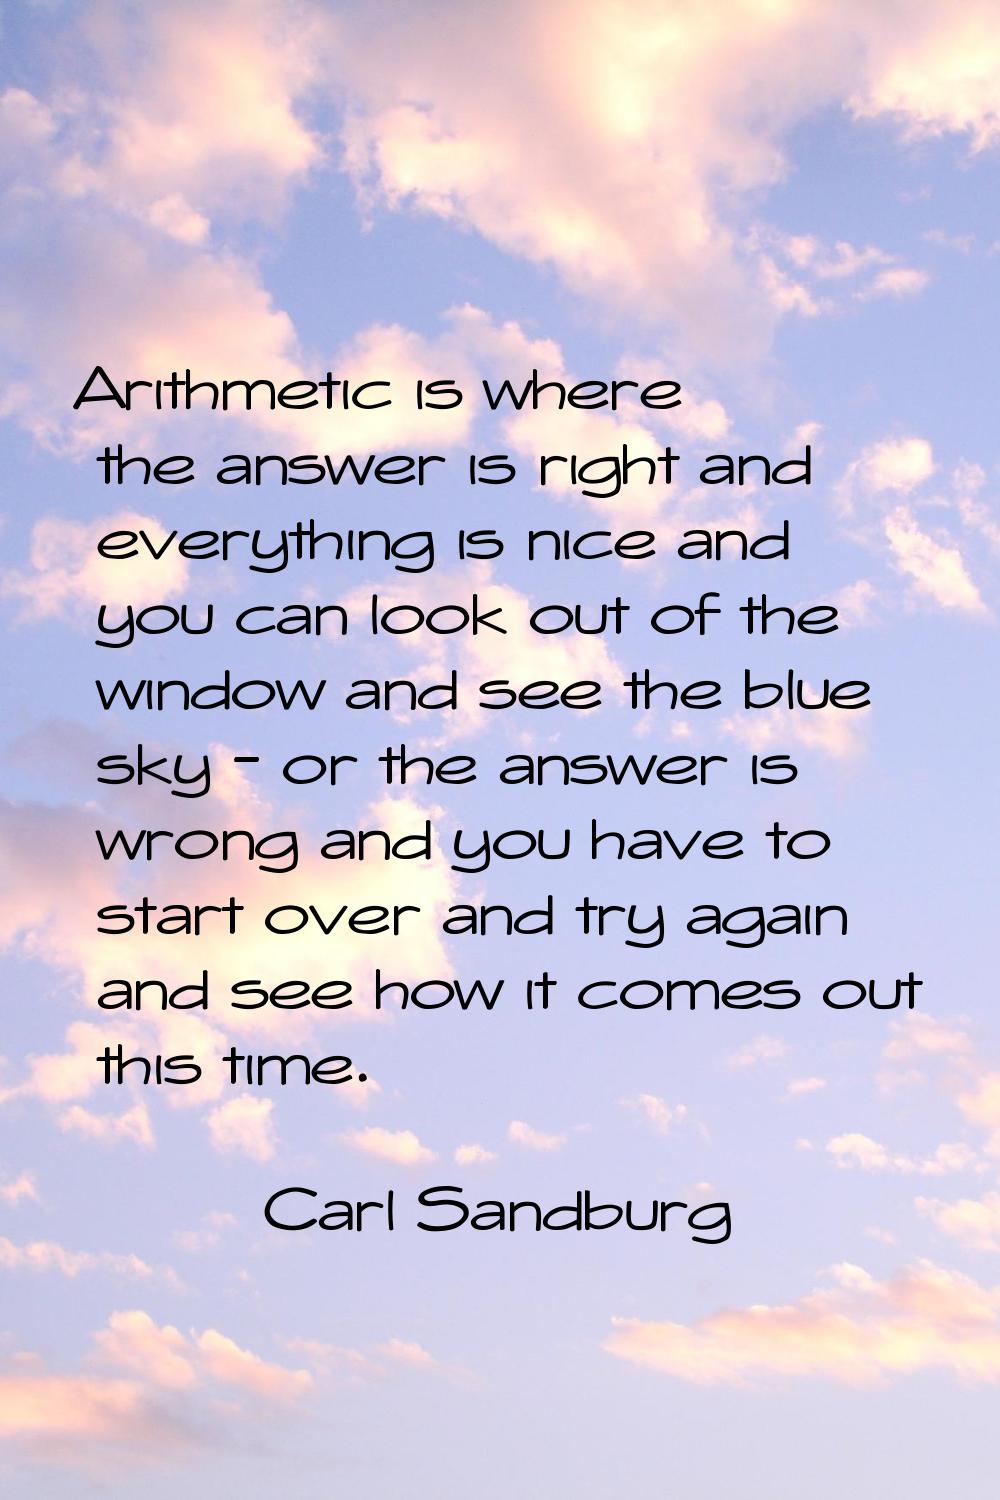 Arithmetic is where the answer is right and everything is nice and you can look out of the window a